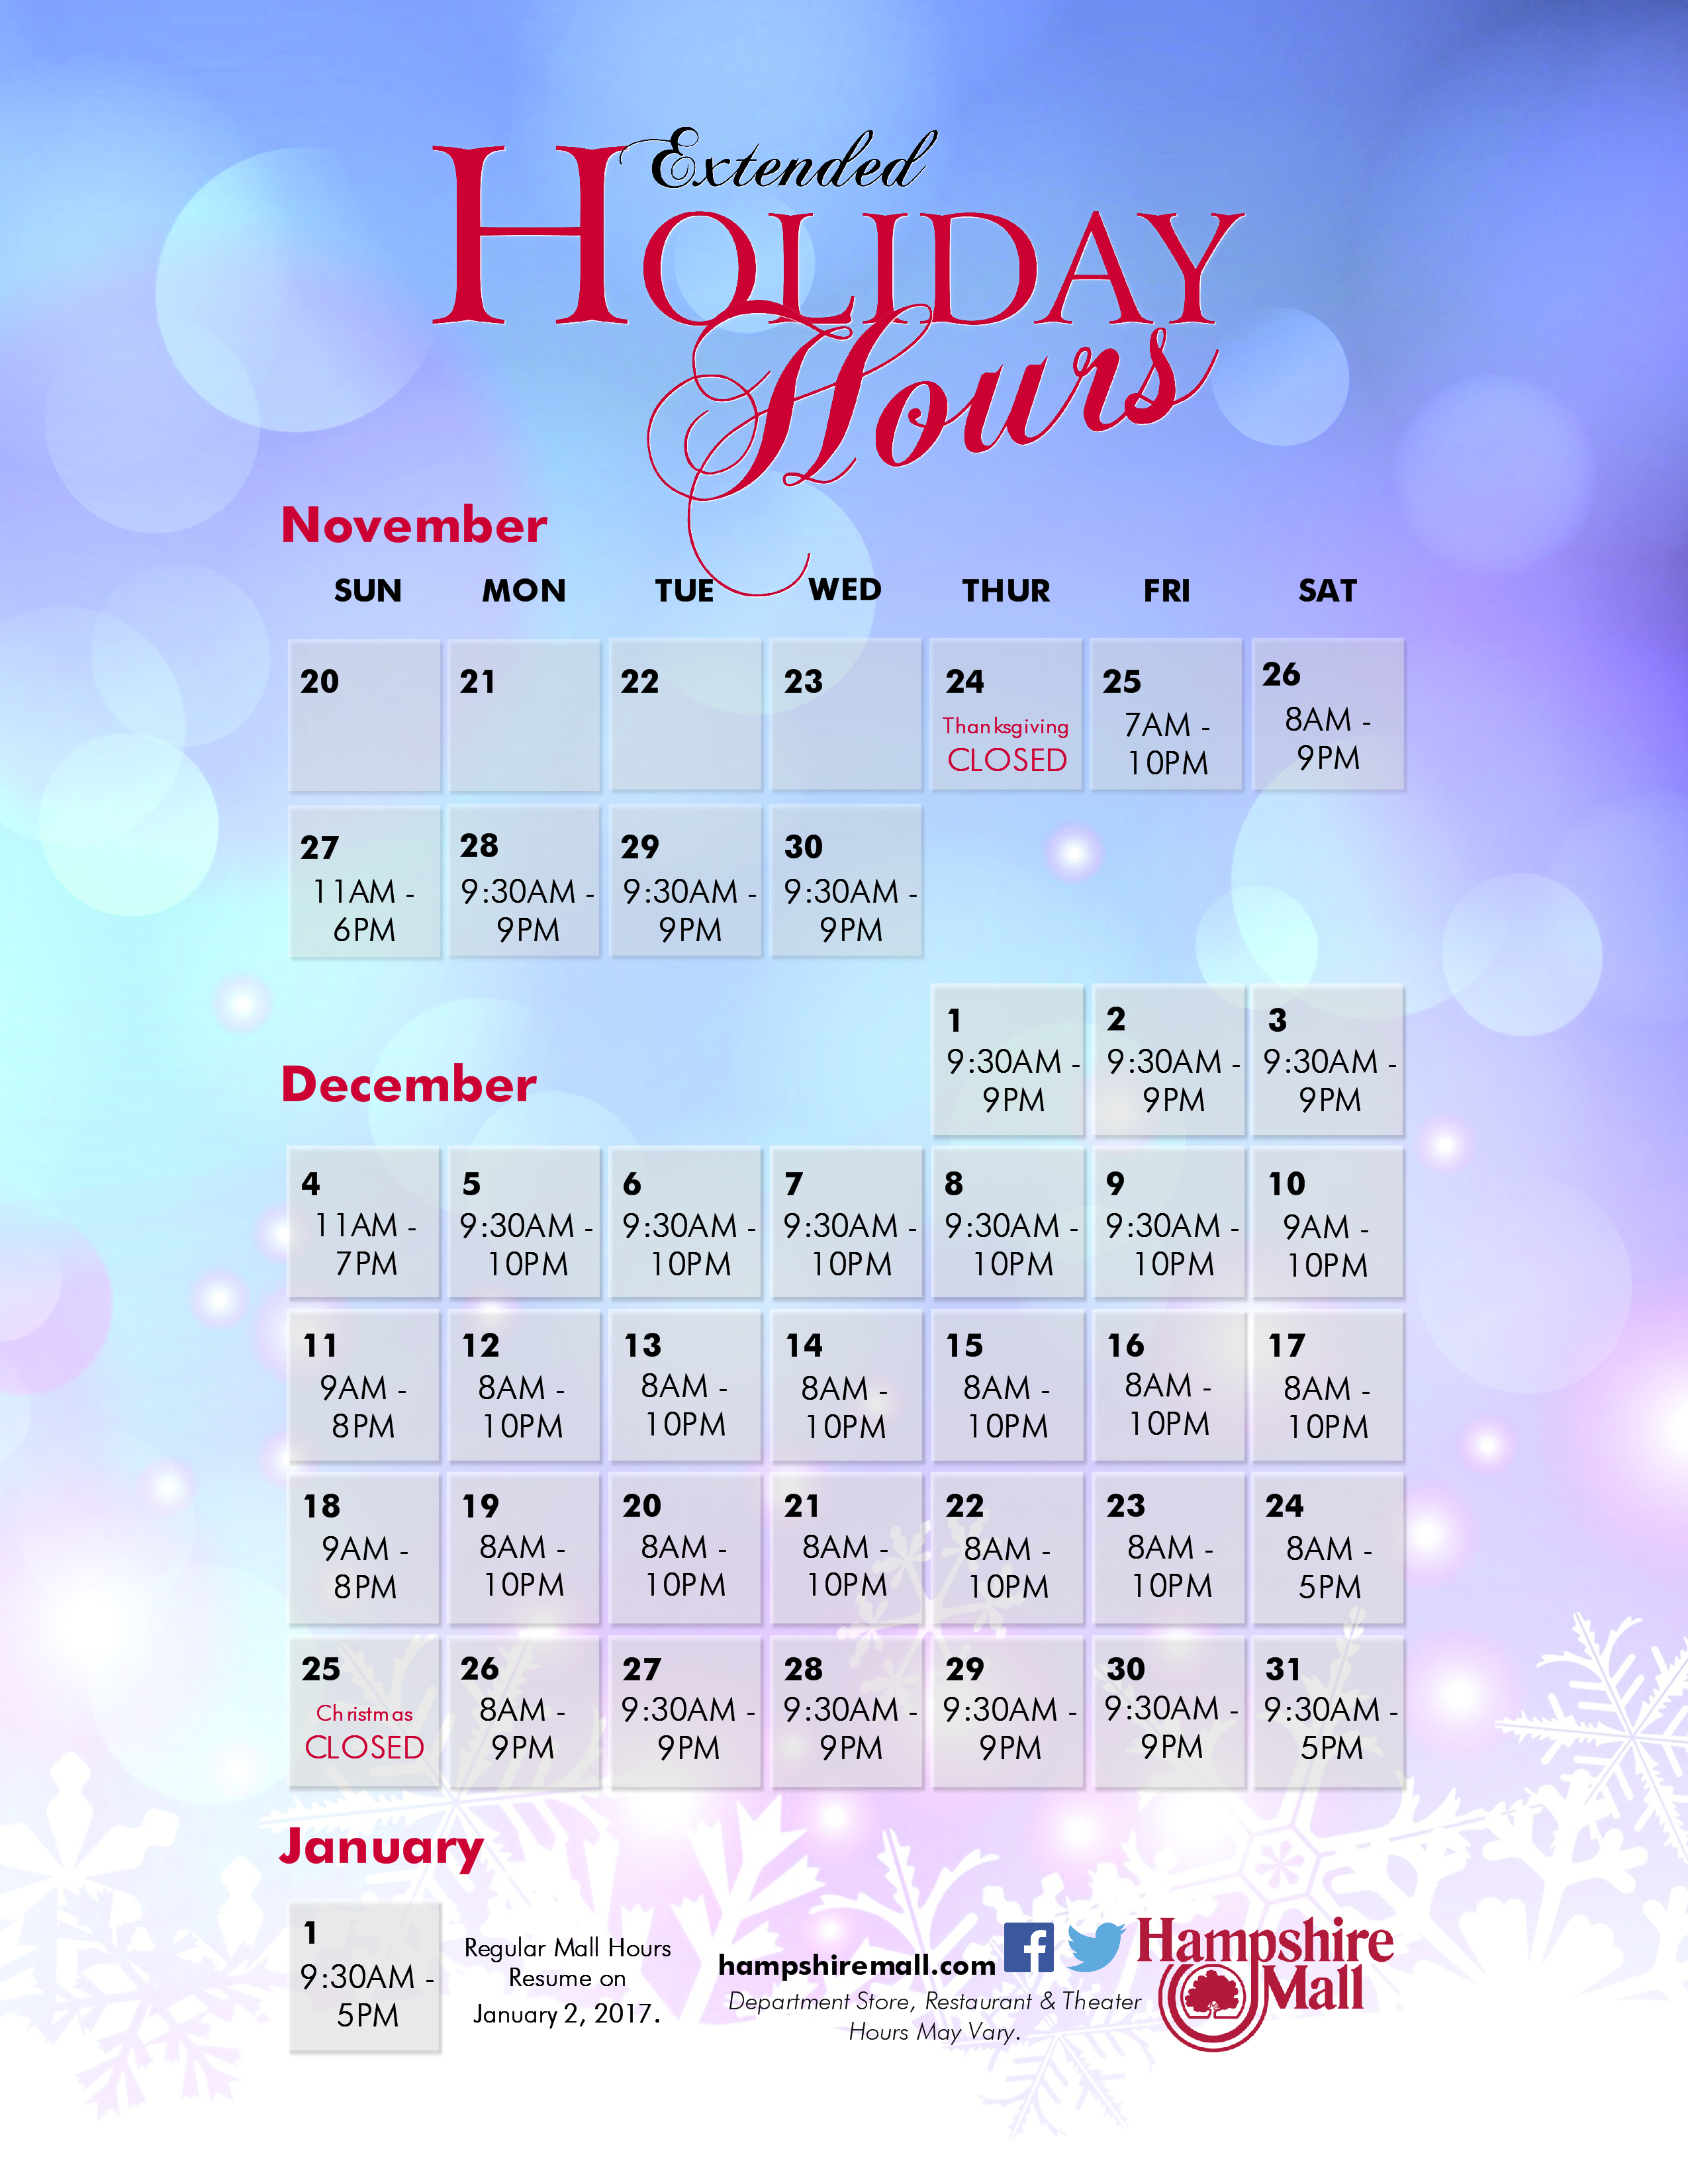 holiday-hours-2016-hampshire